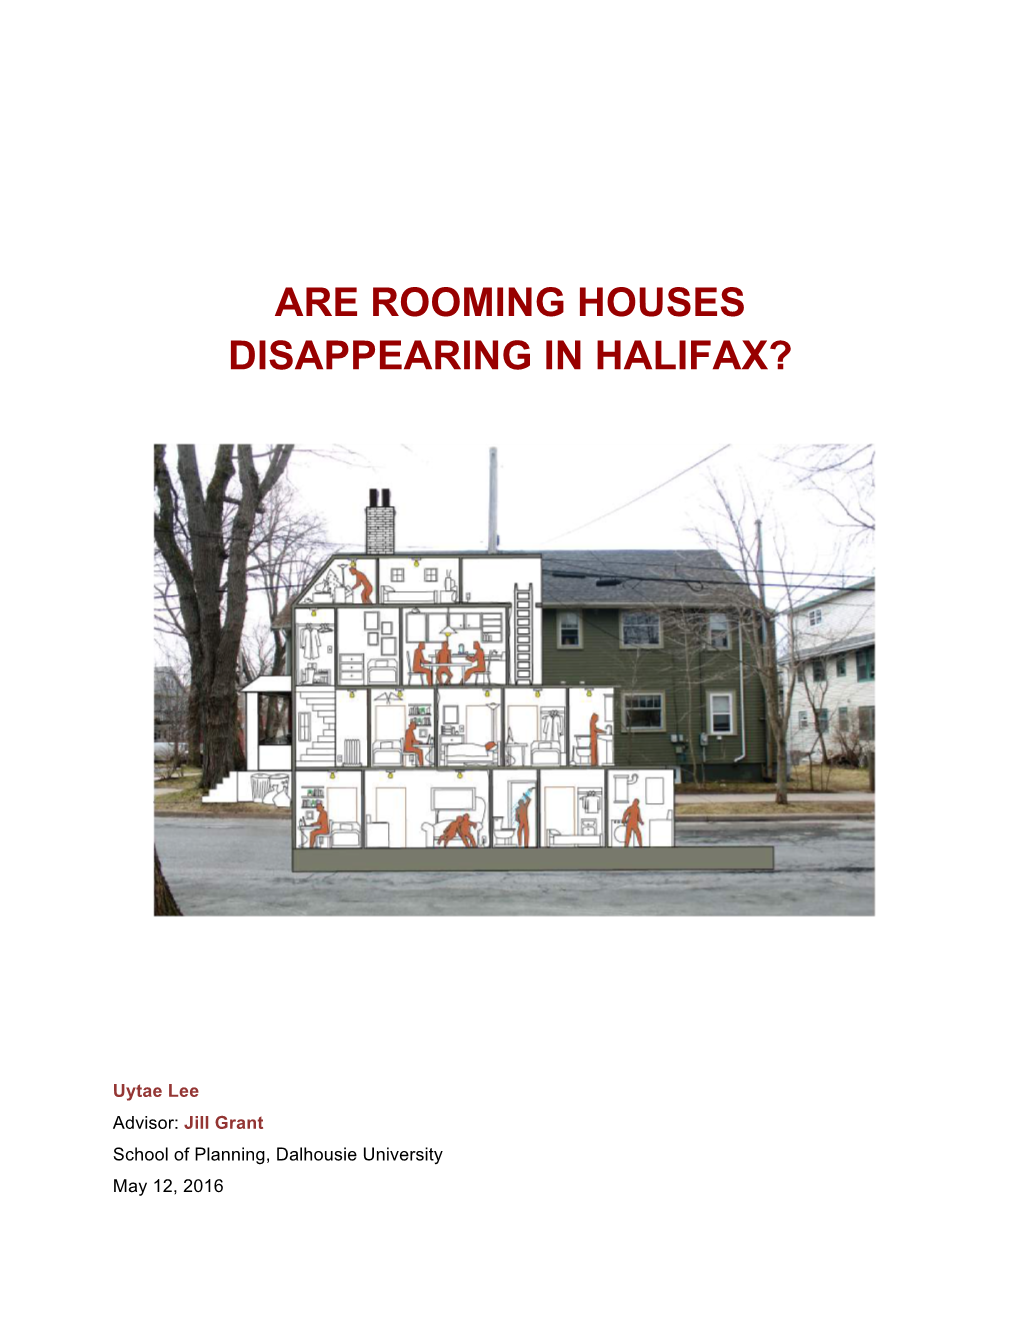 Are Rooming Houses Disappearing in Halifax?